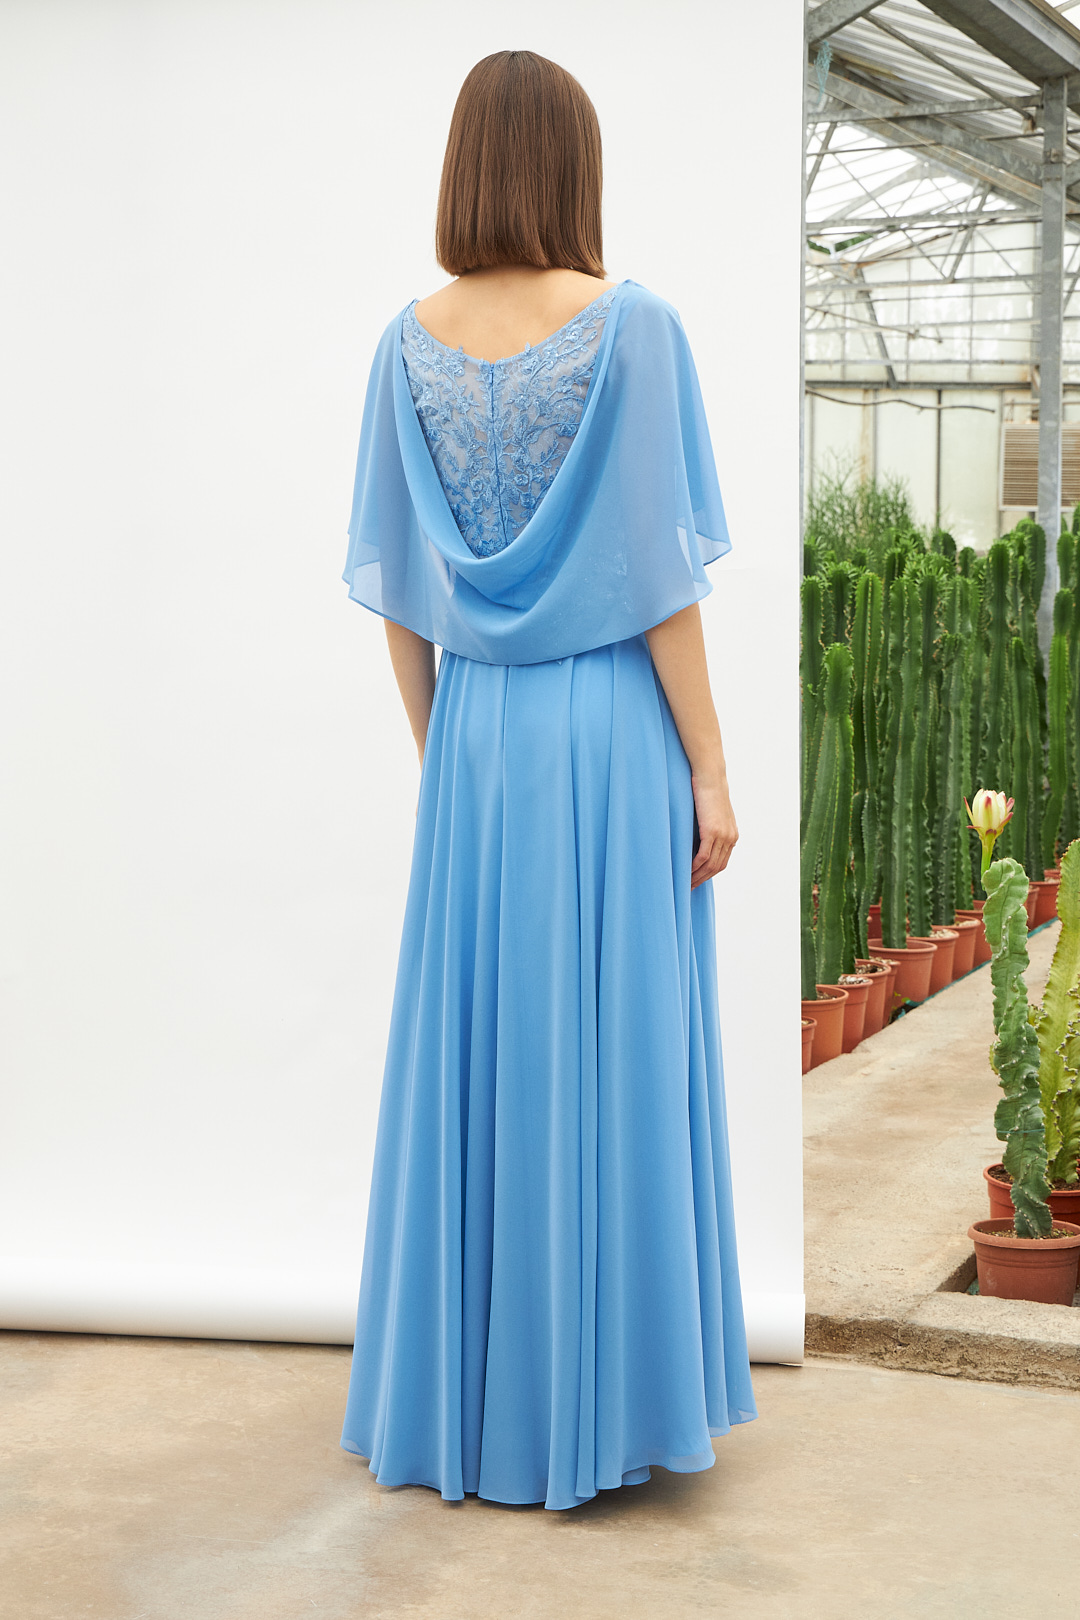 Classic Dresses / Long classic chiffon dress with lace and beaded top for the mother of the bride